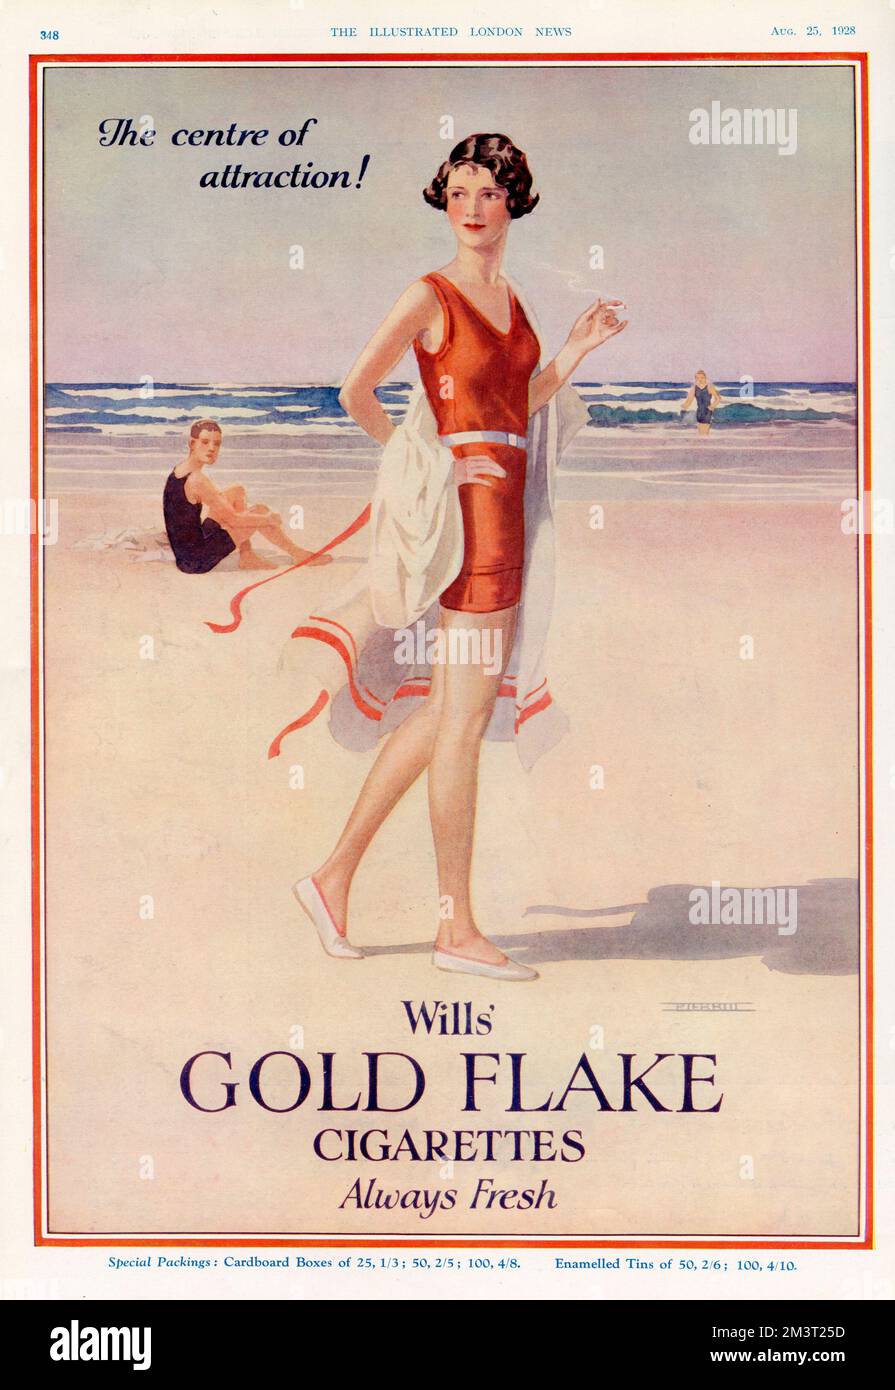 Advert for Wills' Gold Flake cigarettes, featuring a glamorous young woman smoking a cigarette on the beach in a red swimsuit, who is the centre of attraction! Stock Photo